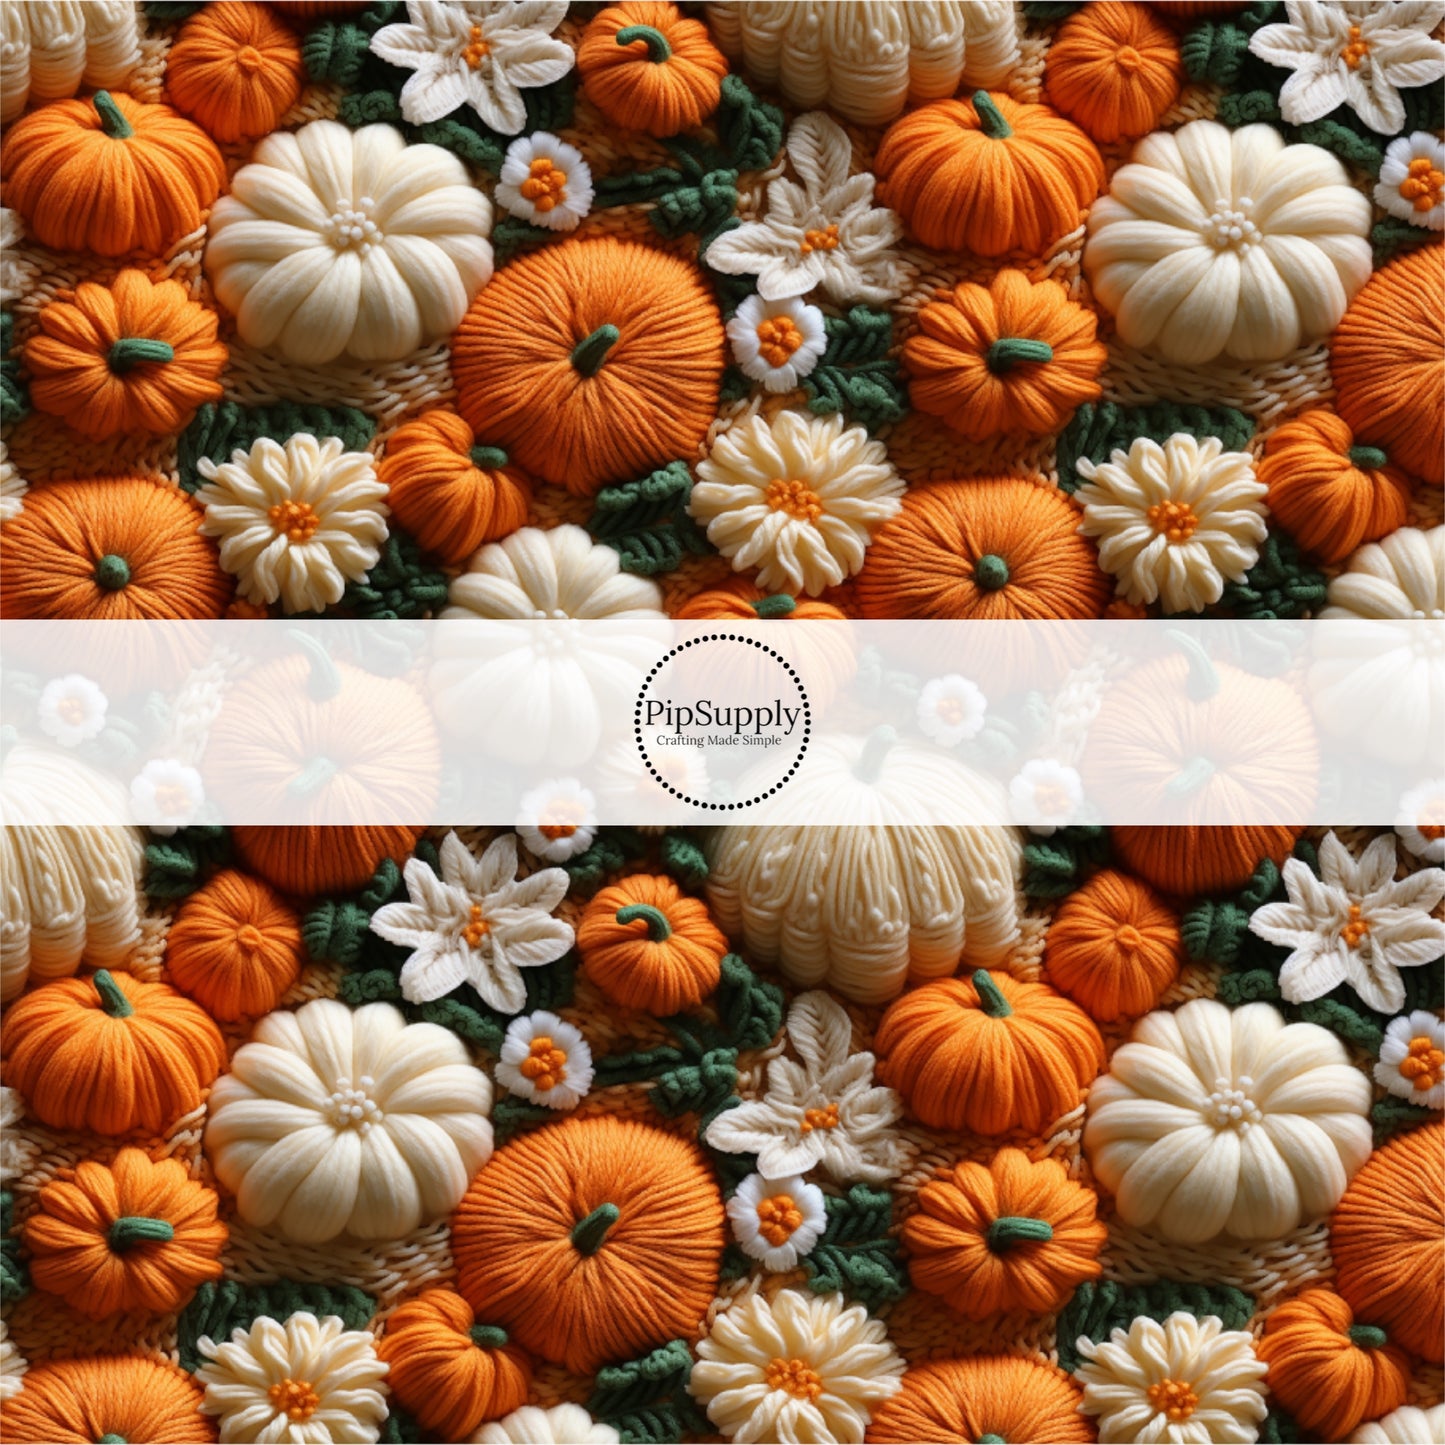 These holiday sewn pattern themed fabric by the yard features orange and cream pumpkins on cream. This fun Halloween fabric can be used for all your sewing and crafting needs!